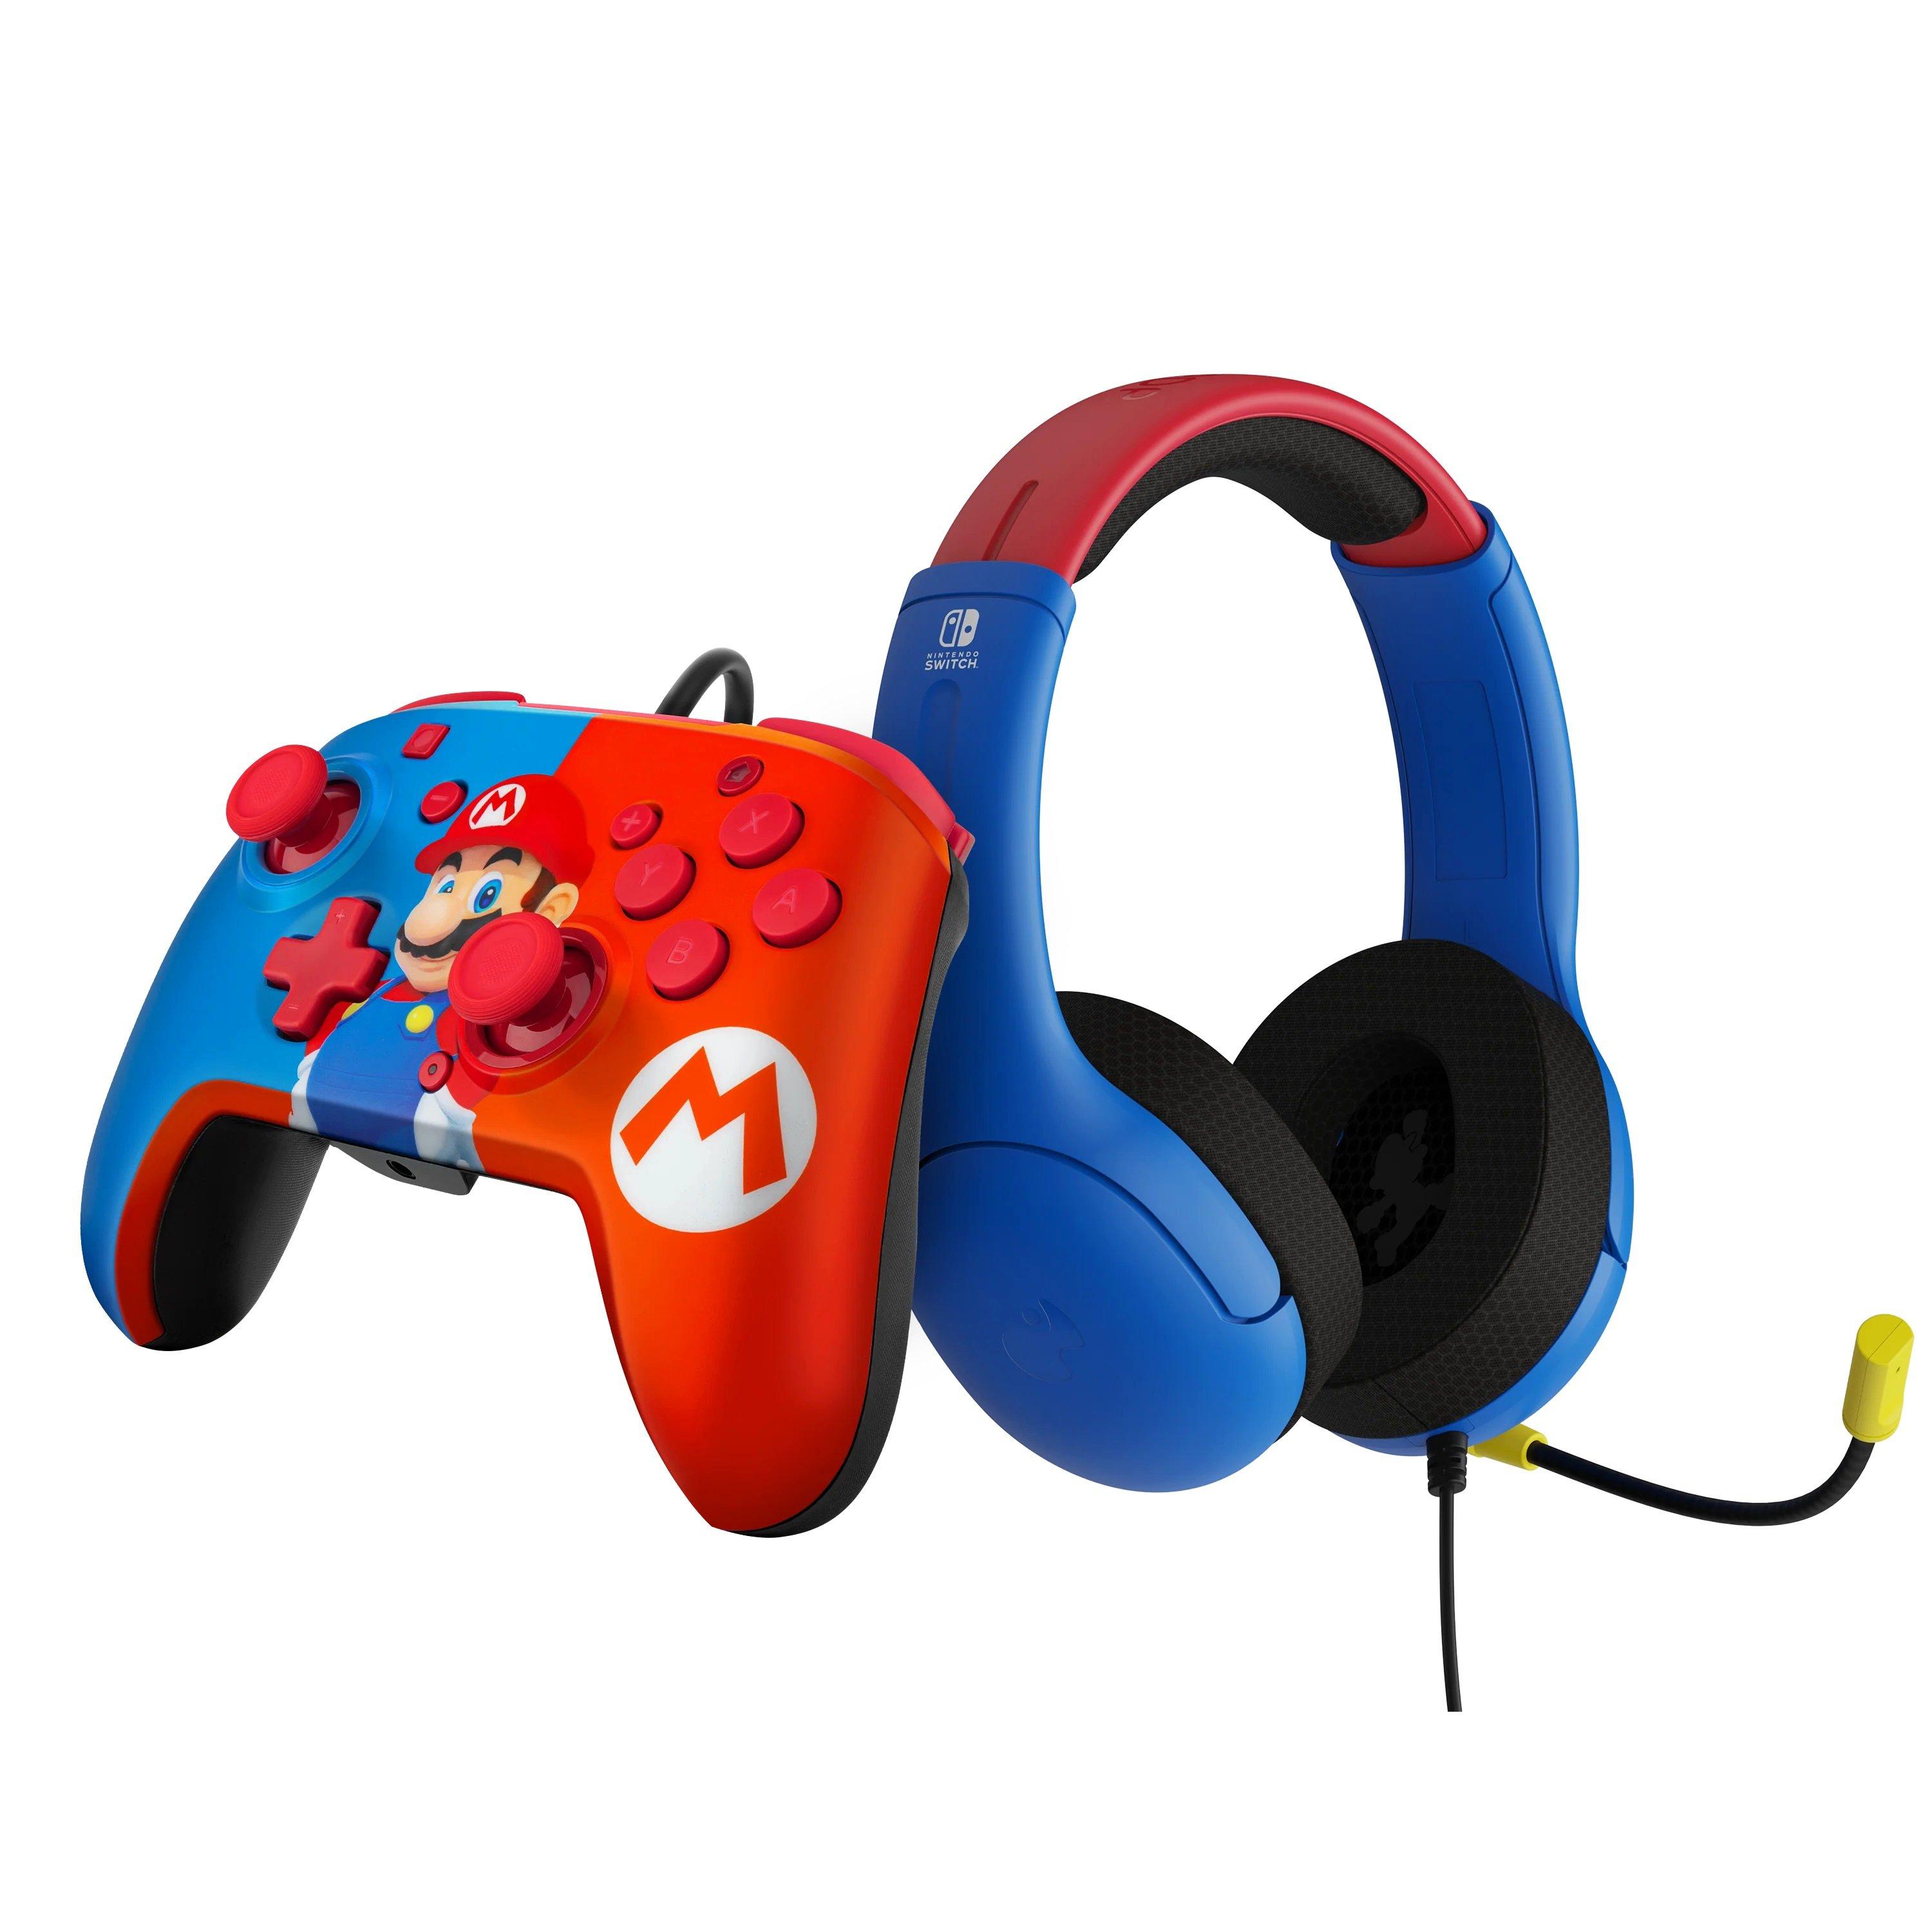 PDP Wired Headset and Wired Bundle - Dash | GameStop